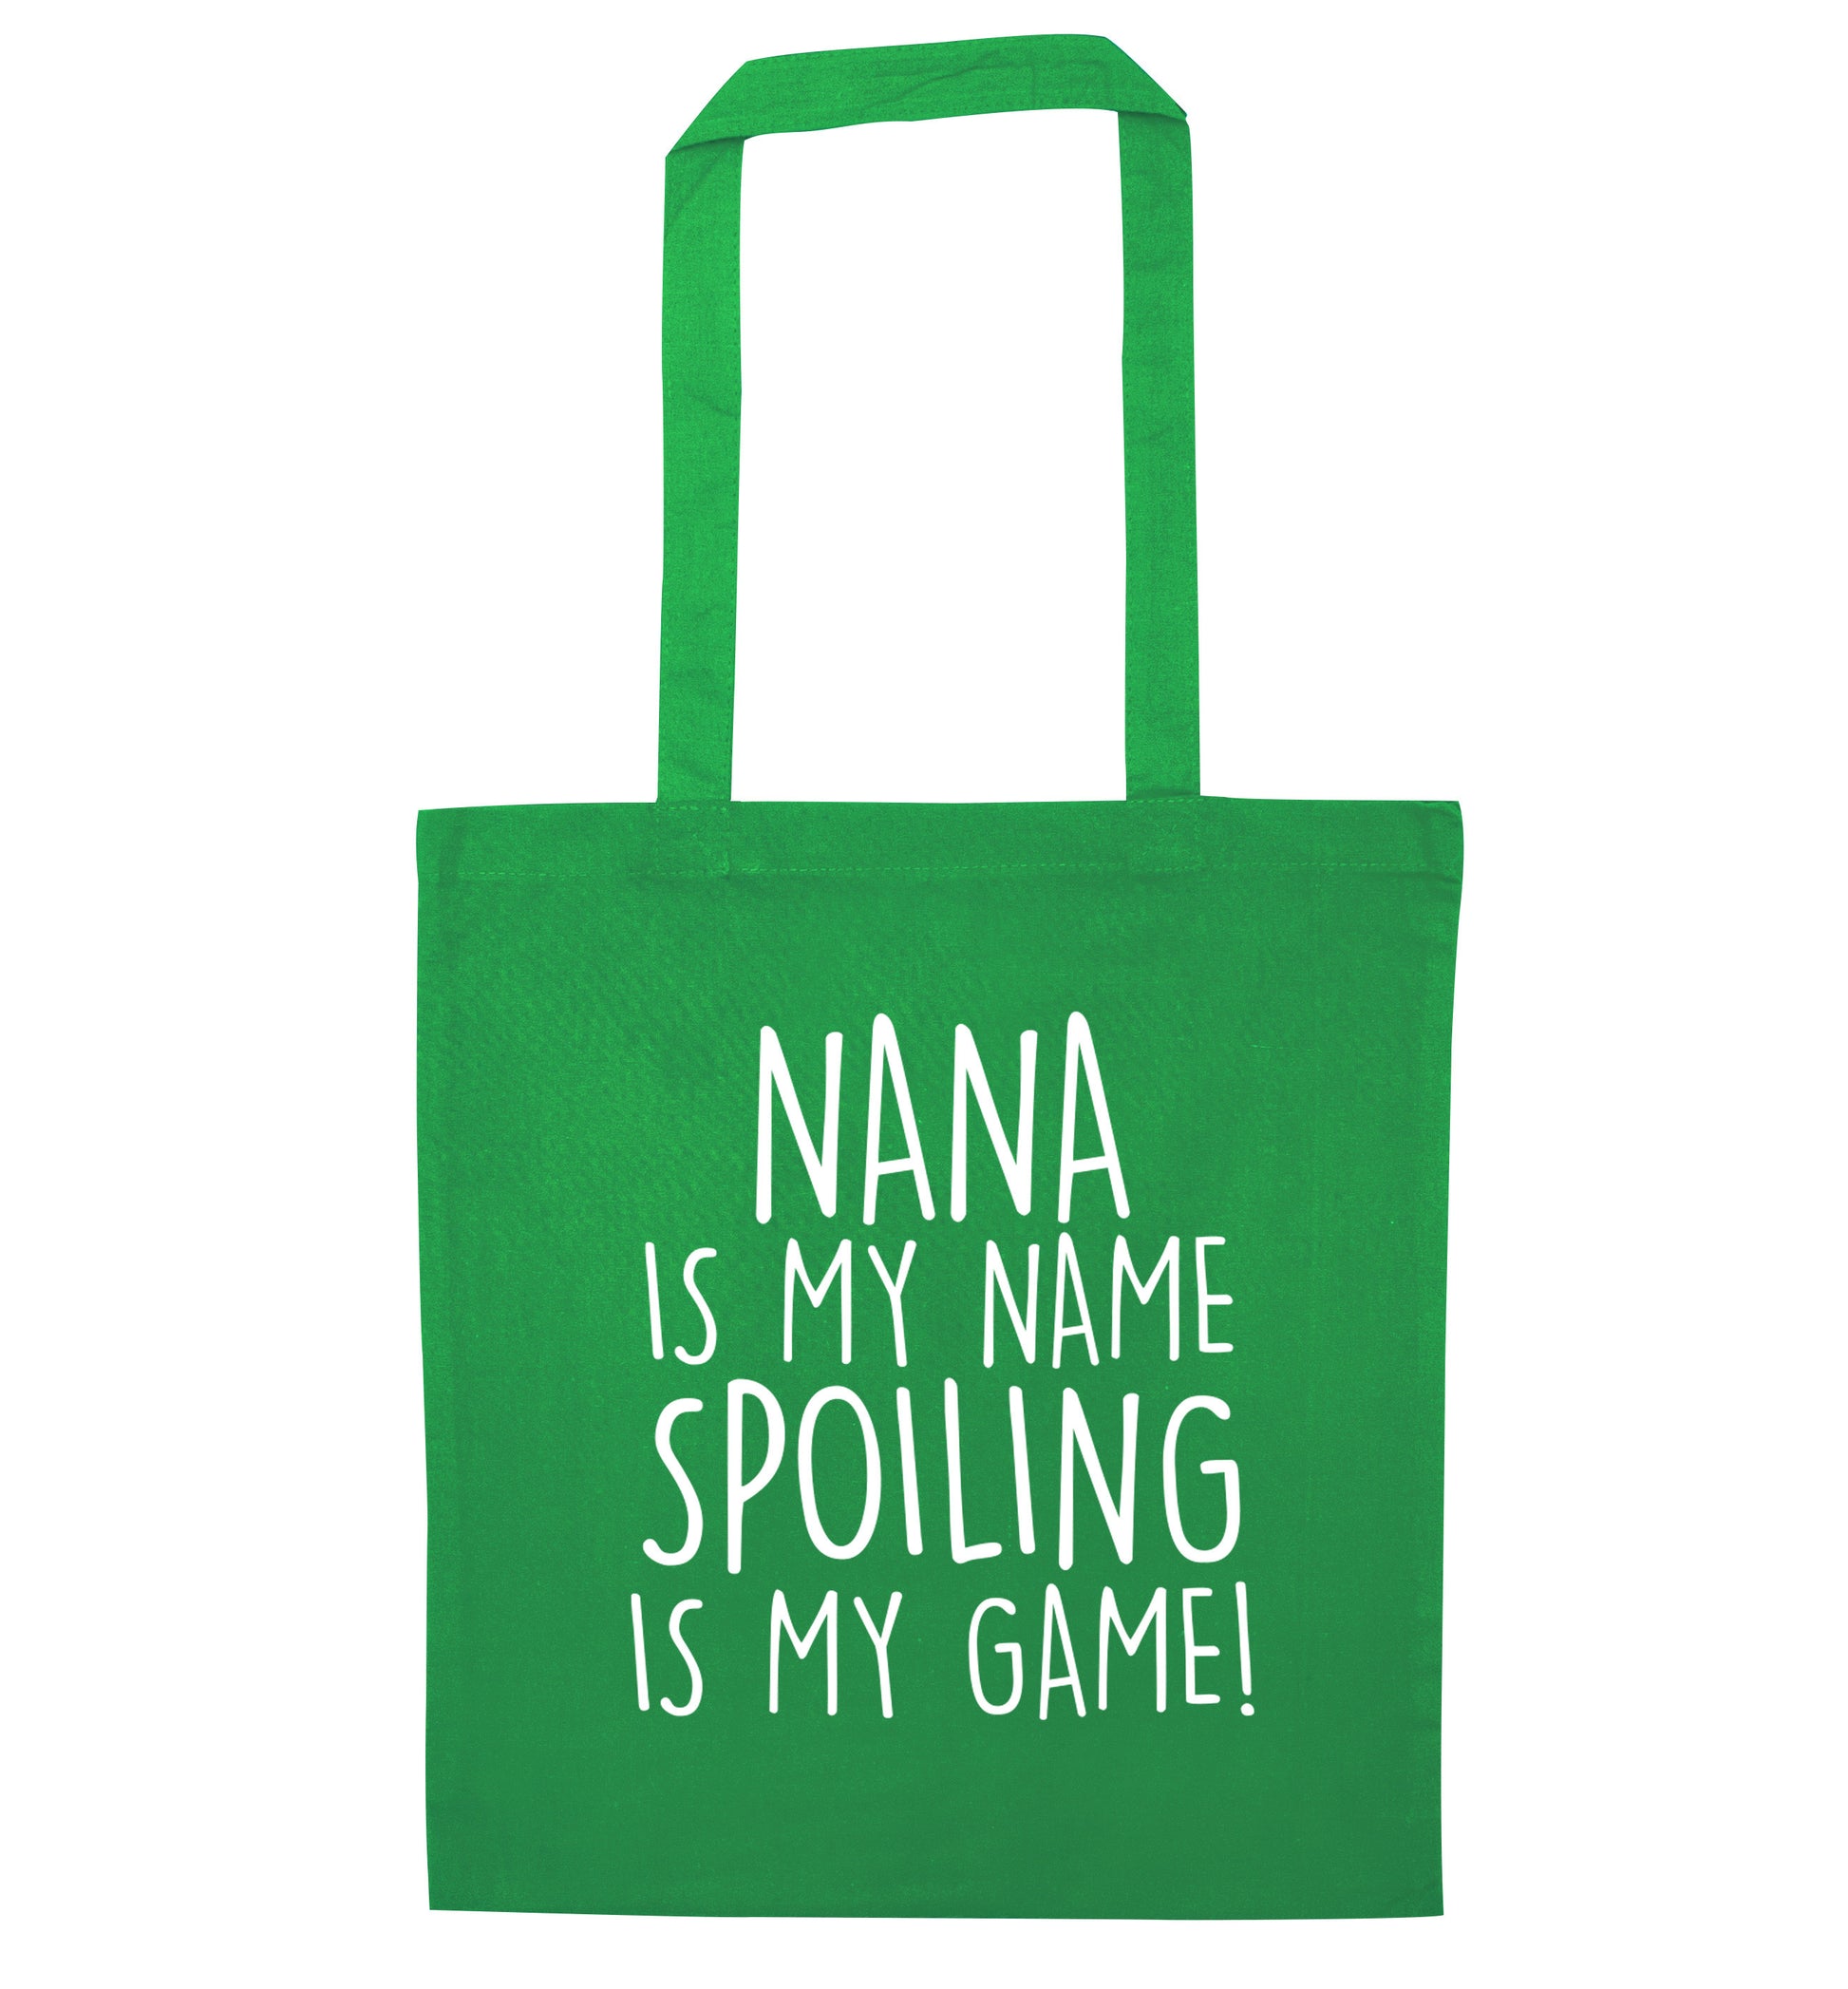 Nana is my name, spoiling is my game green tote bag